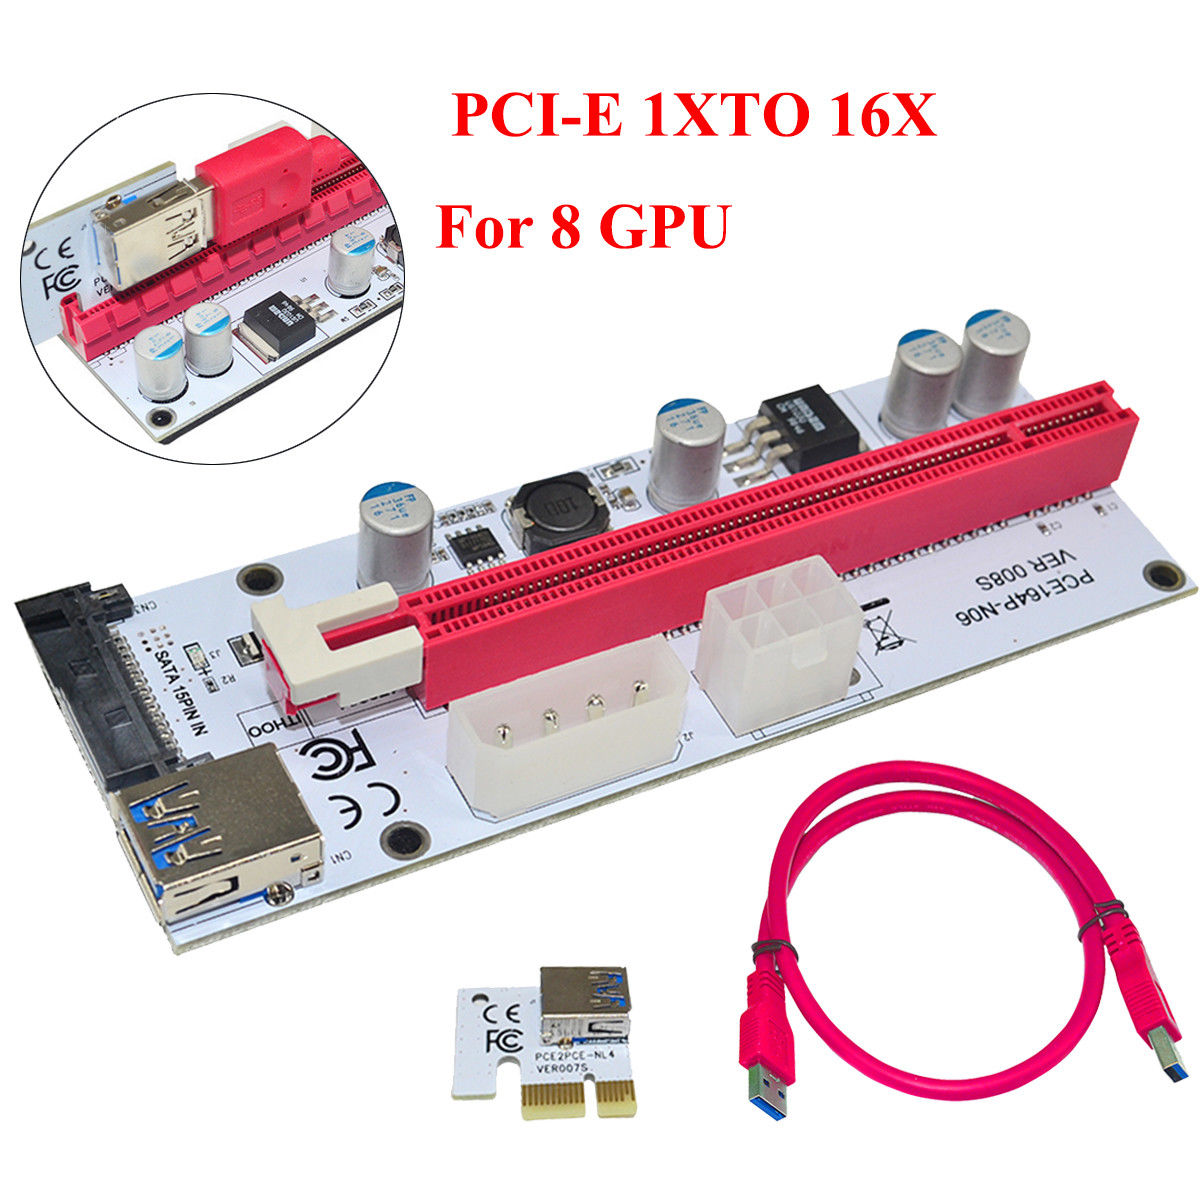 USB 3.0 PCI-E Express 1X to16X Extender Riser Board Card Adapter For 8 GPU Miner